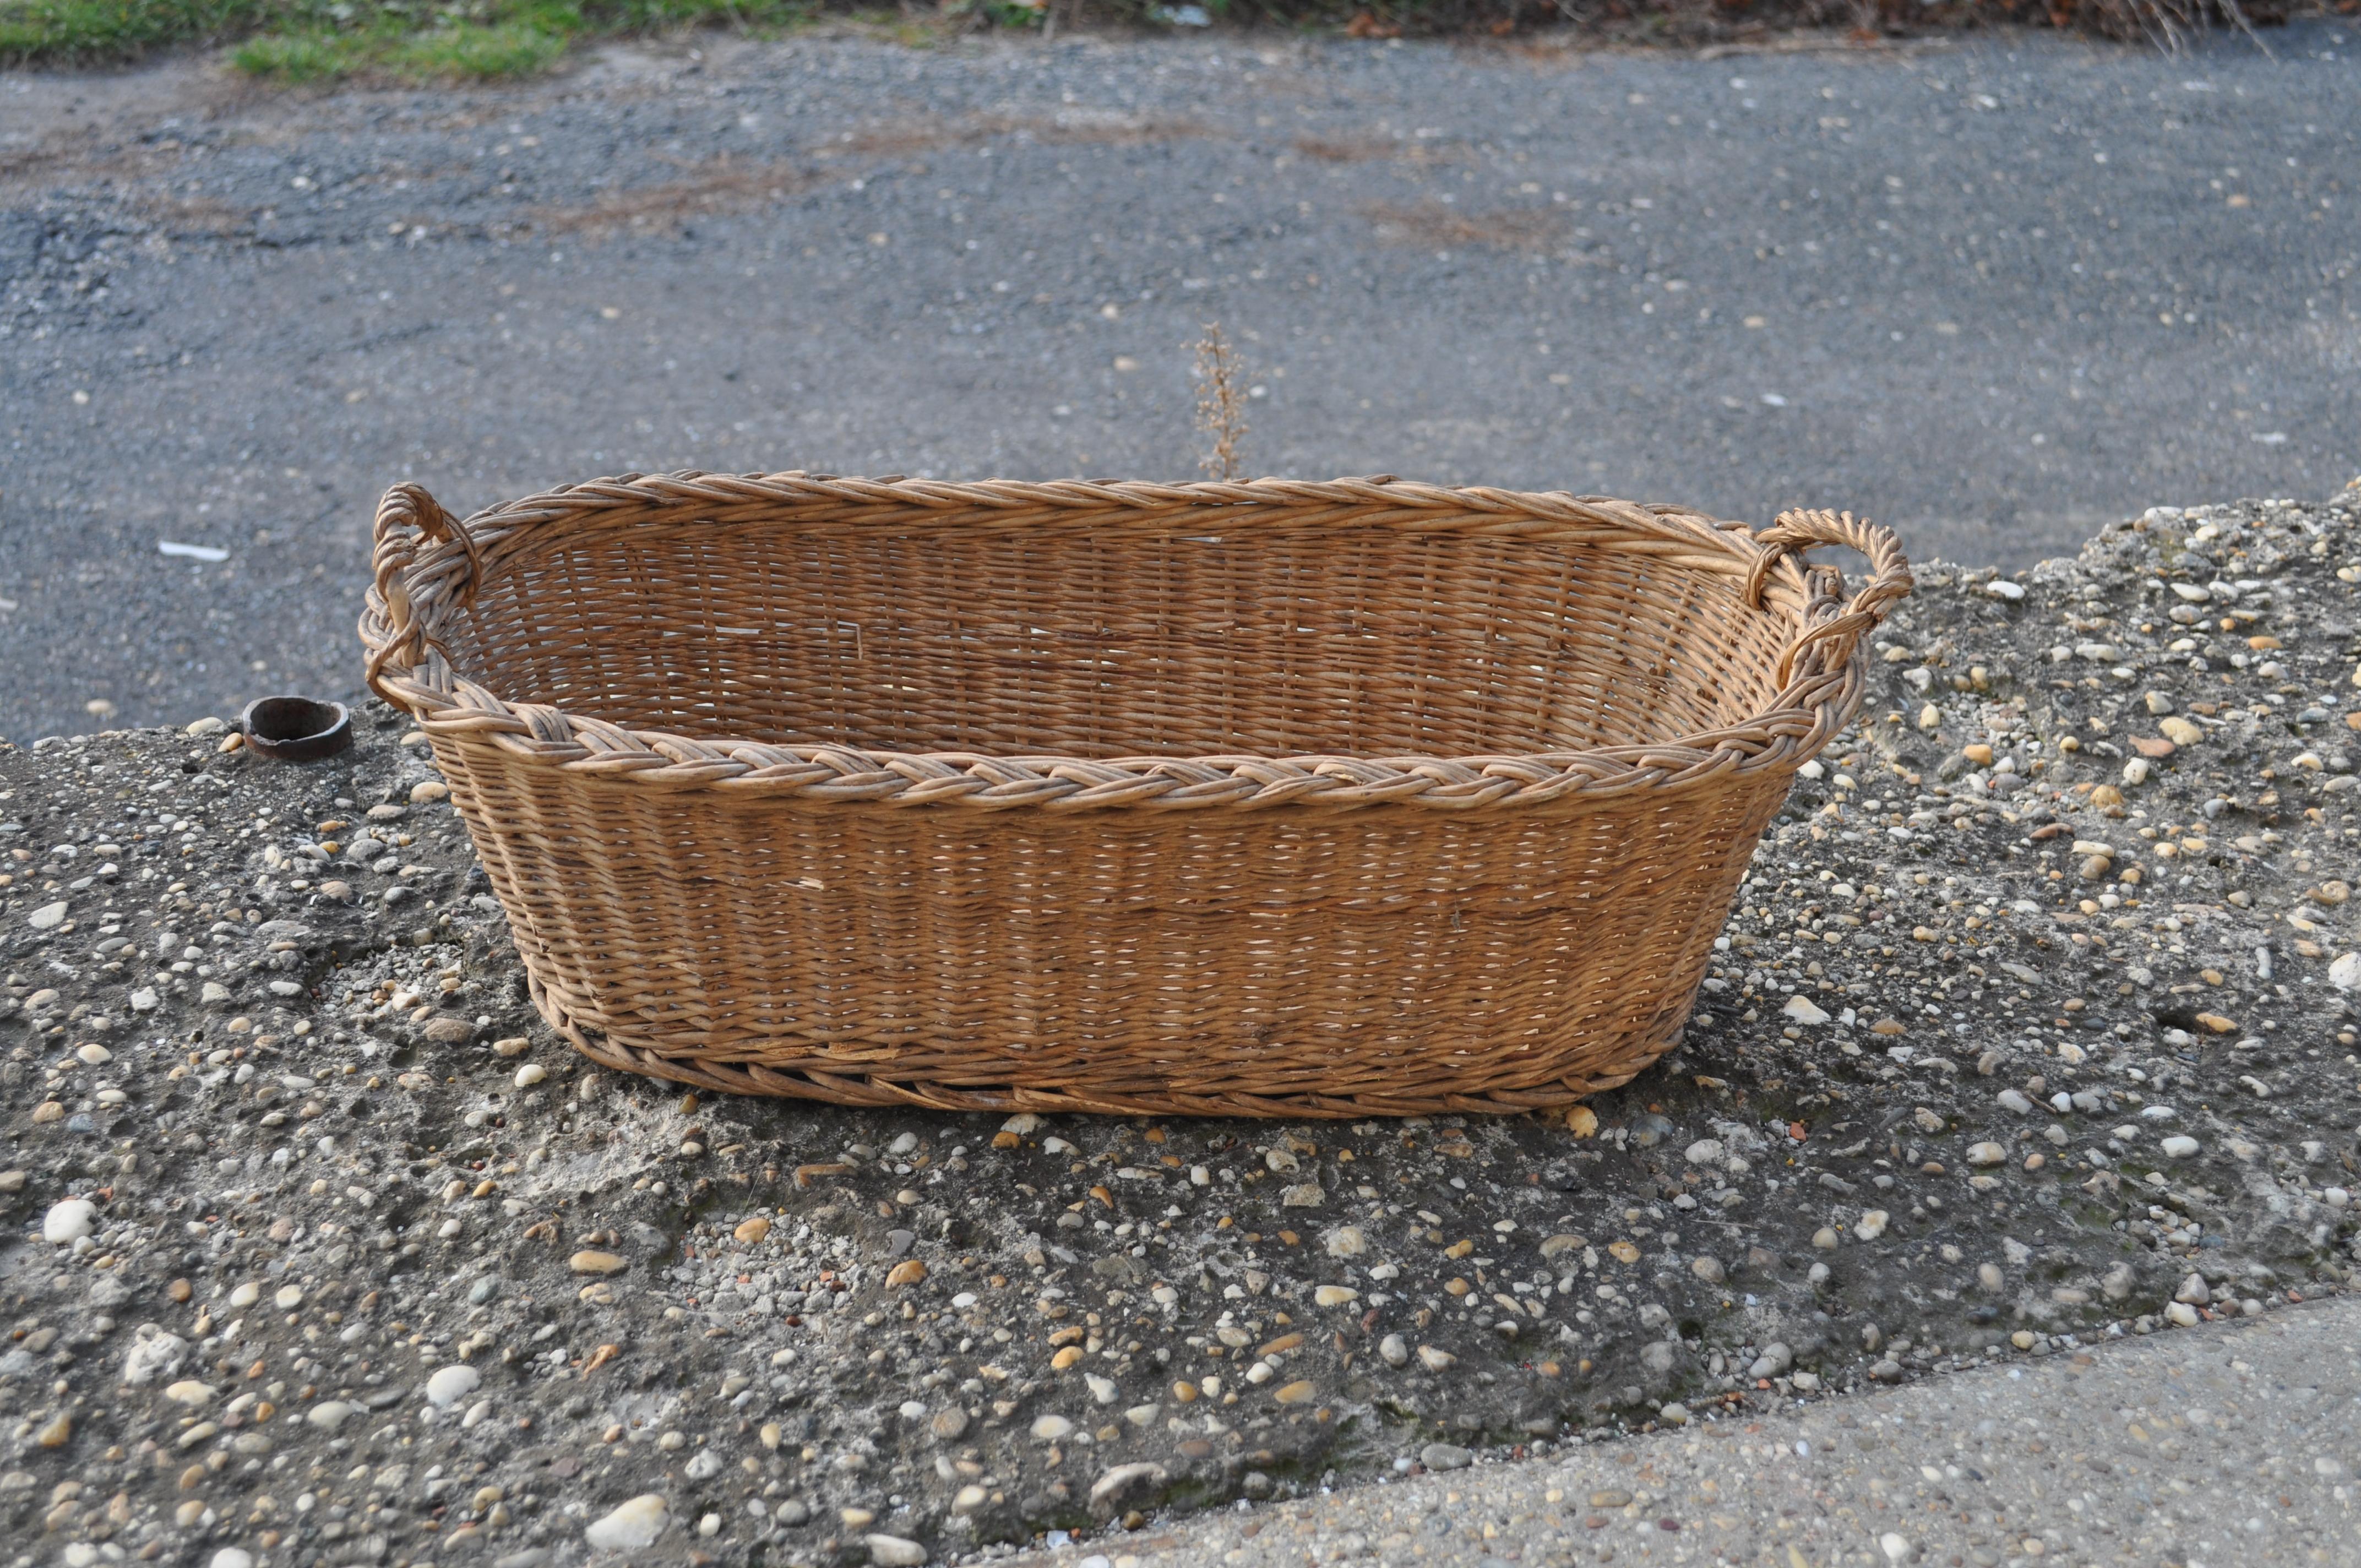 Vintage Baguette basket. Charming handwoven bread basket. Perfect for your Baguette's.
4 available, listed price is for one (1) basket.